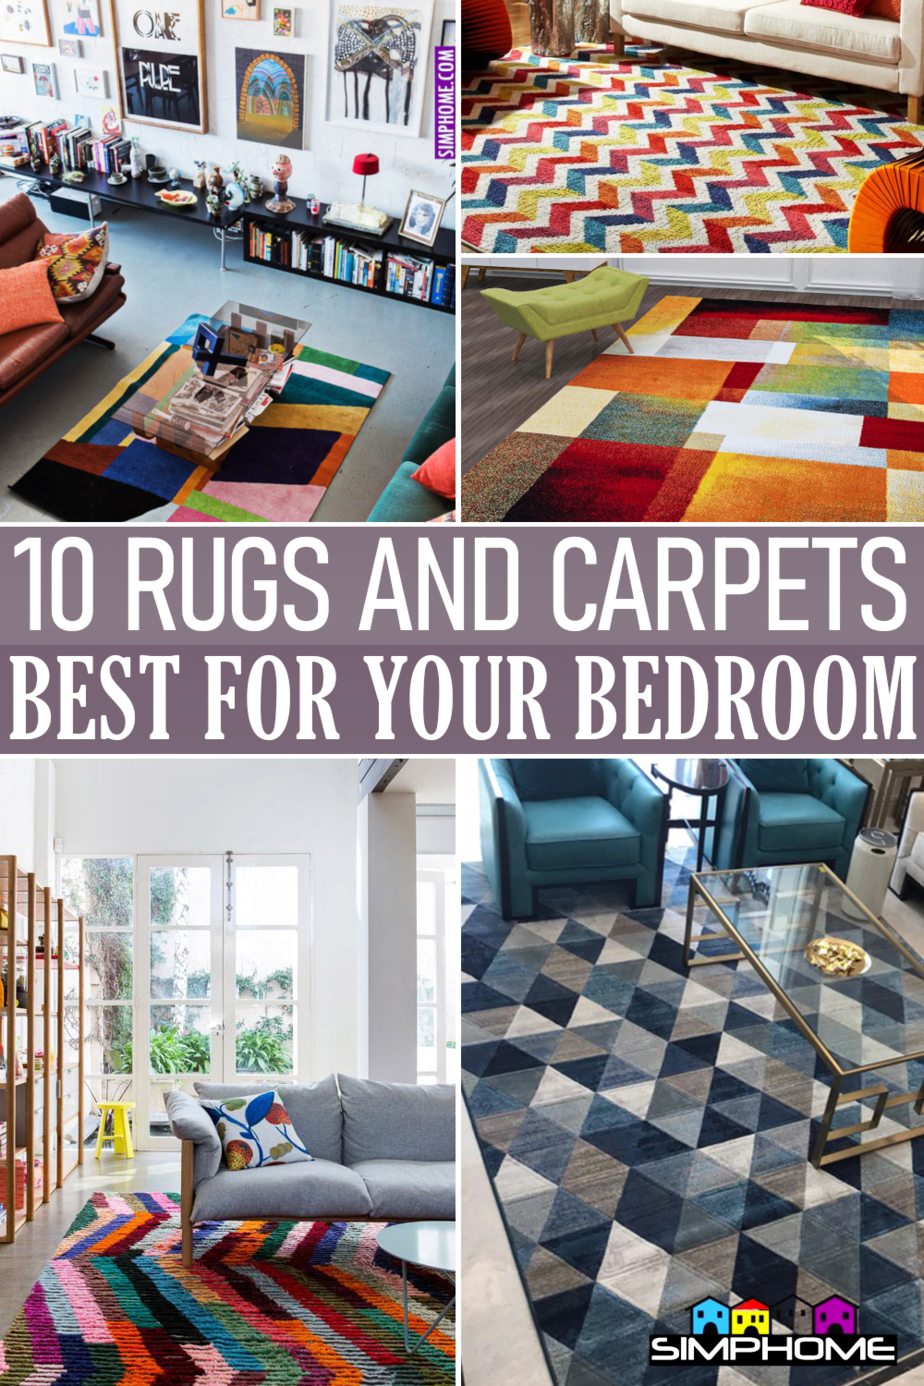 How to Choose best rugs and carpet via Simphome.comFeatured